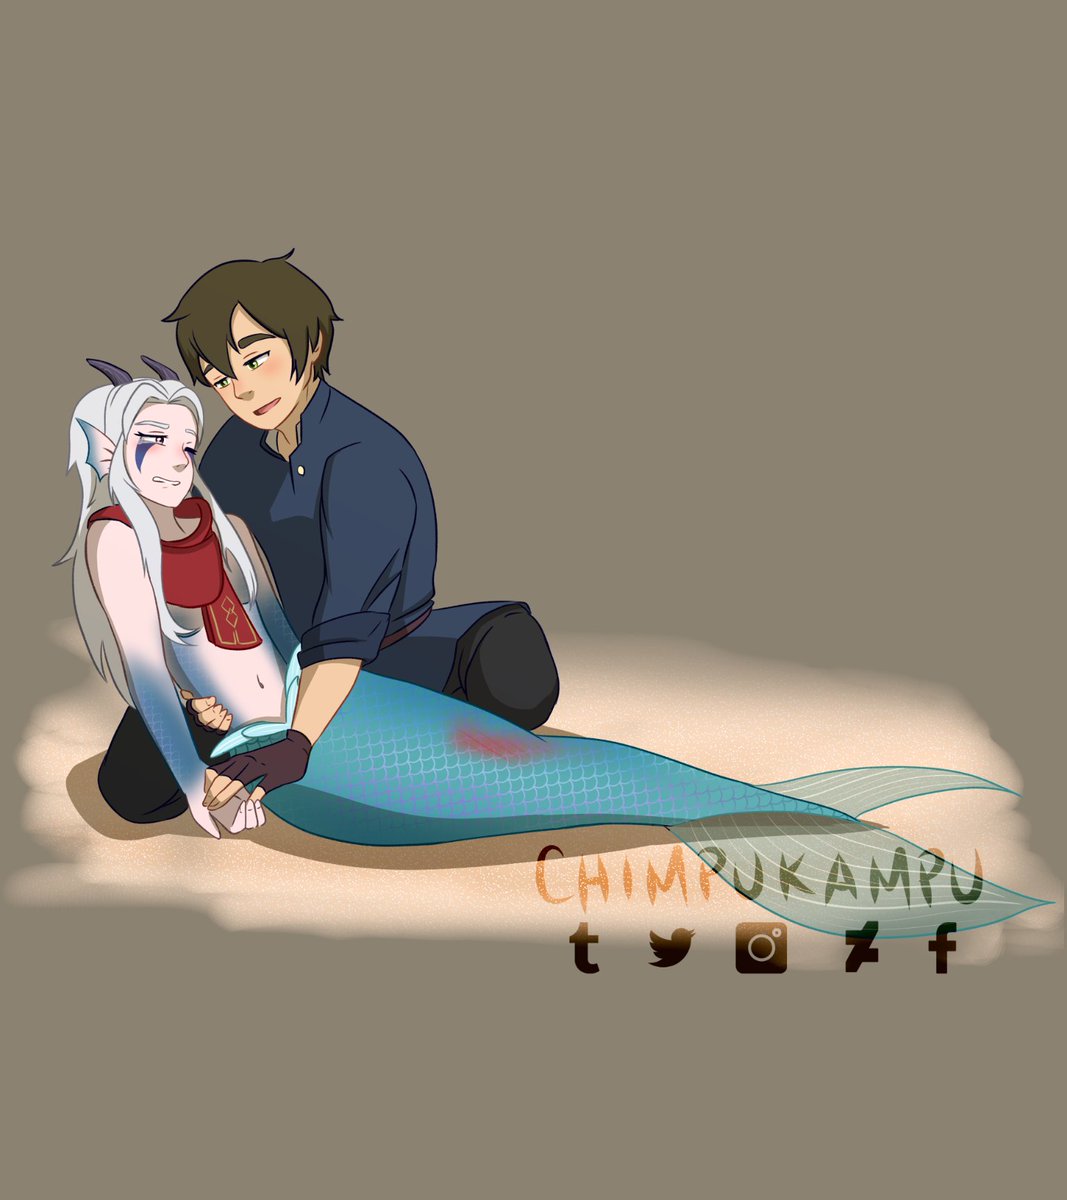 I was playing “Mermaid” by Train more than once while drawing this, which obviously where my art was based from 🥰

#TDP #TheDragonPrince #Rayllum #Mermay #mermay2020 #FANART #digitalart